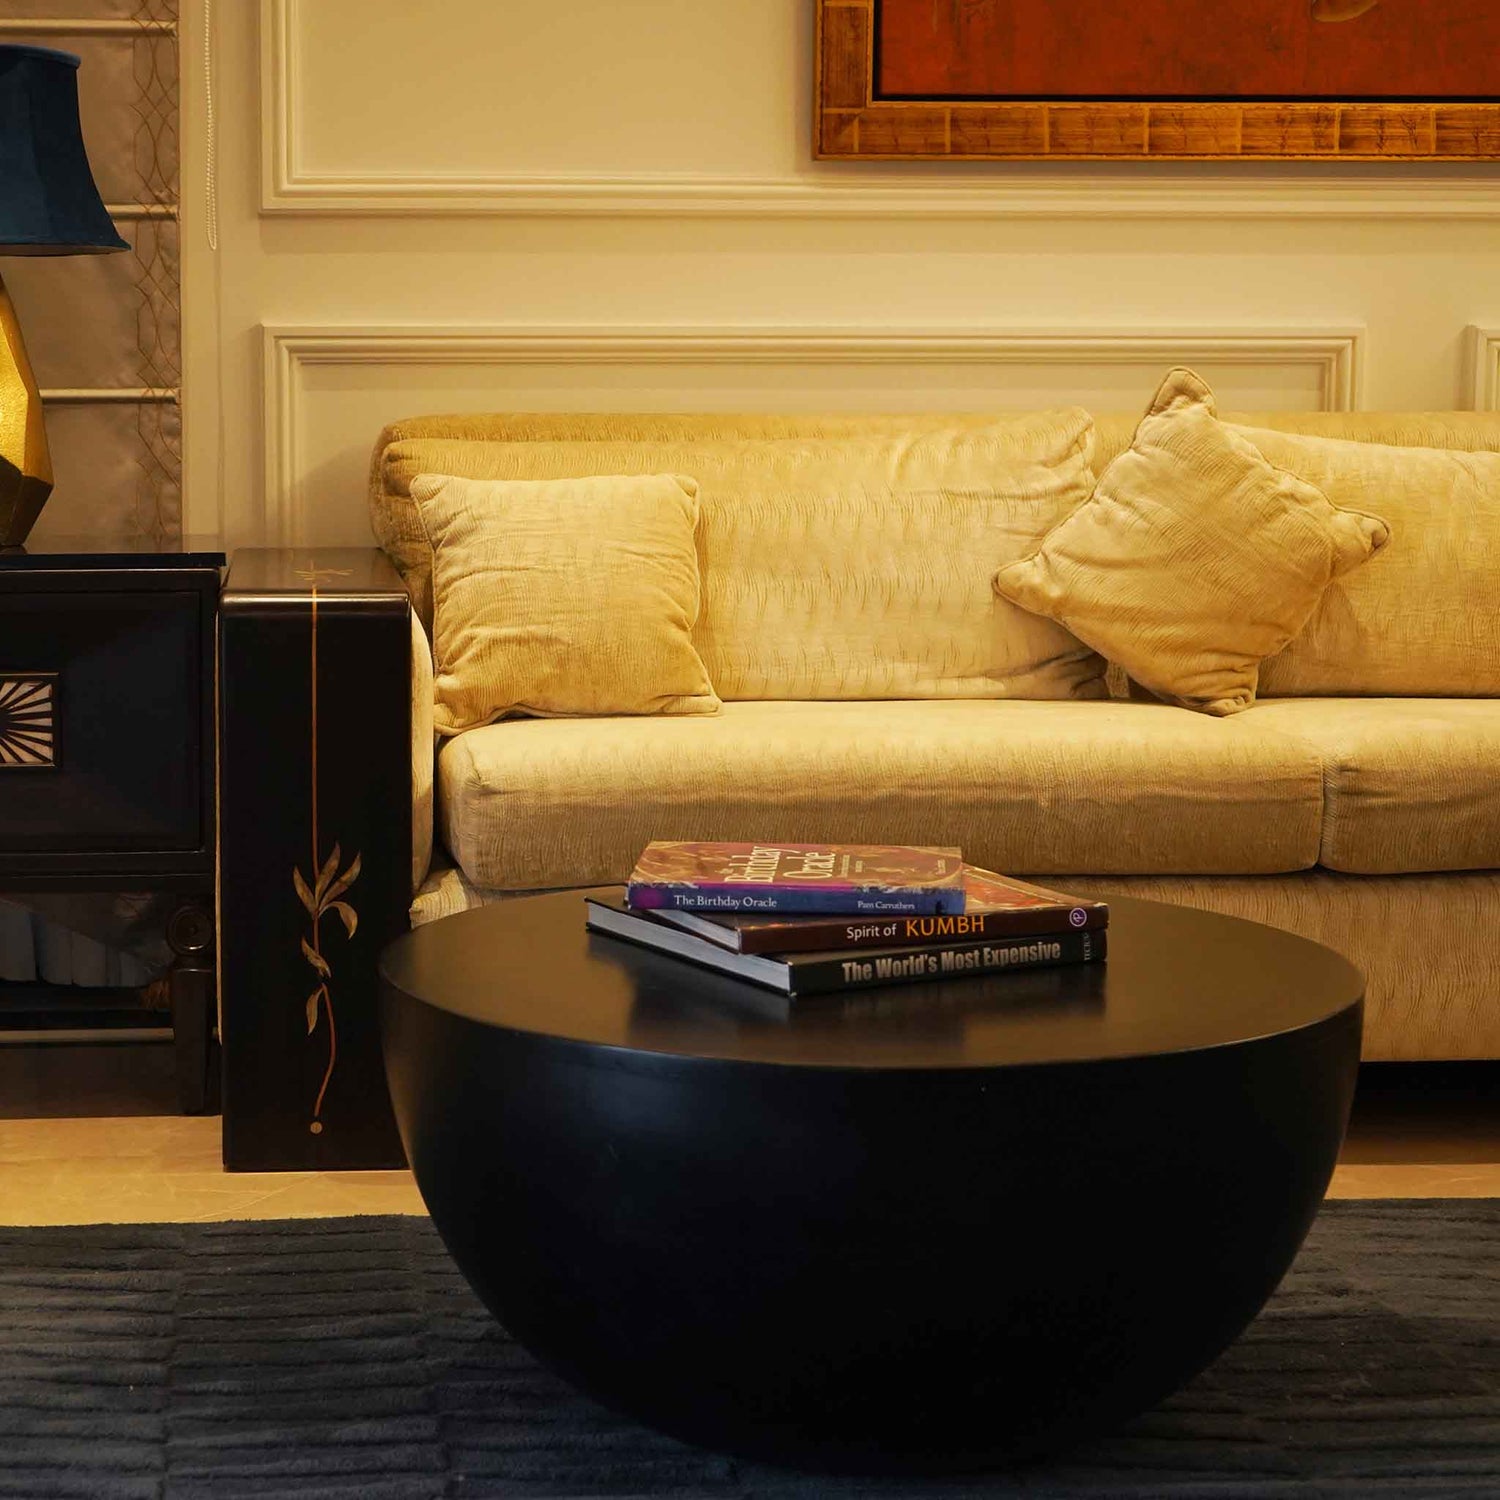 Black colored oval shape mango wood coffee table in a living room set-up.